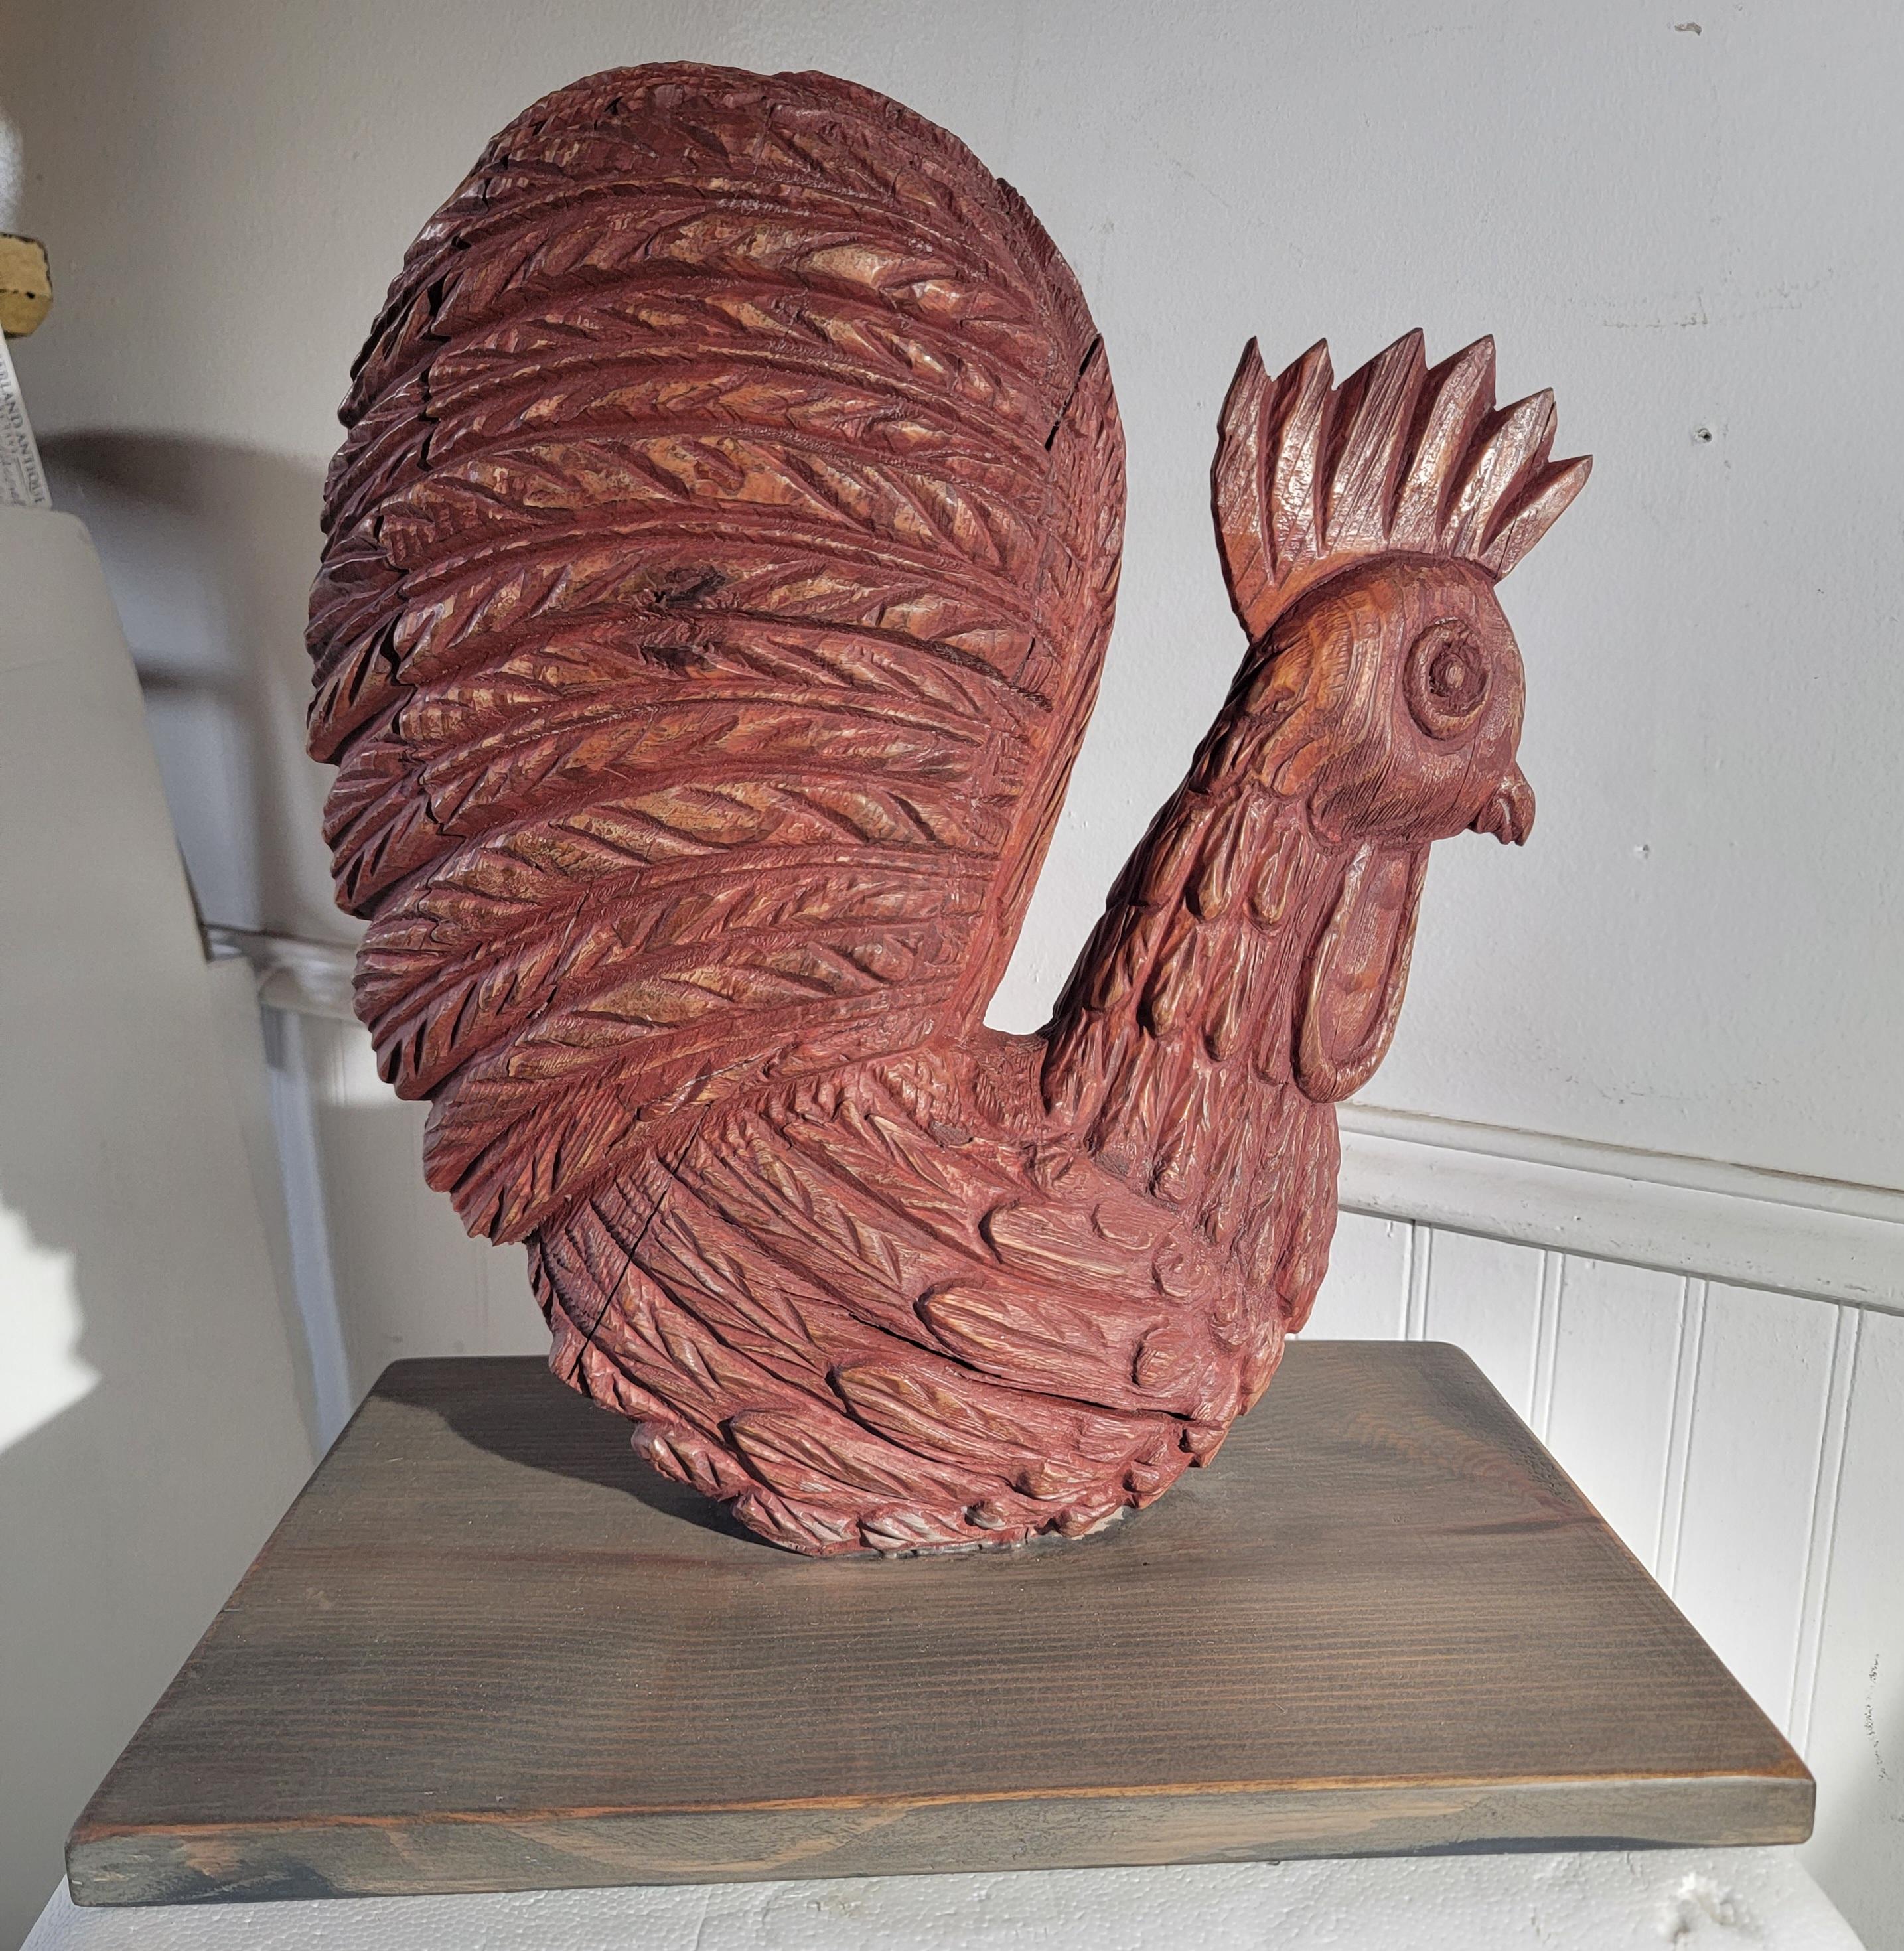 This fine folk art 18thc hand carved rooster ,sculpture sits on a board /stand.This fine sculpture has a wonderful red wash painted surface & several shrinkage cracks from natural age.This was found in New England estate.